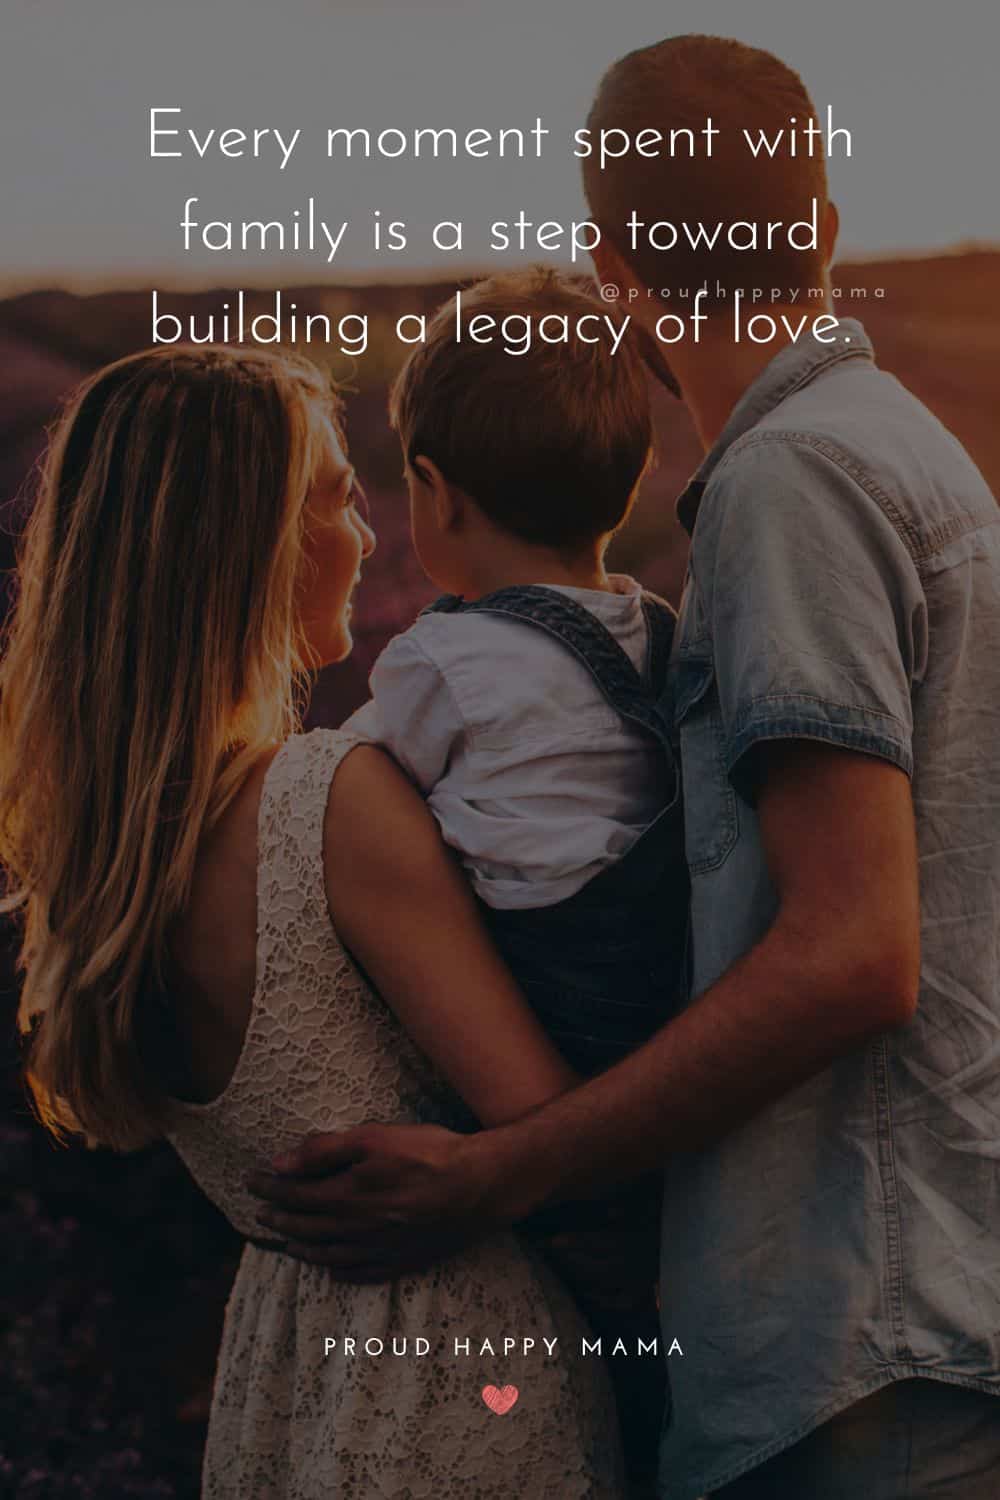 time with family quotes - Every moment spent with family is a step toward building a legacy of love.